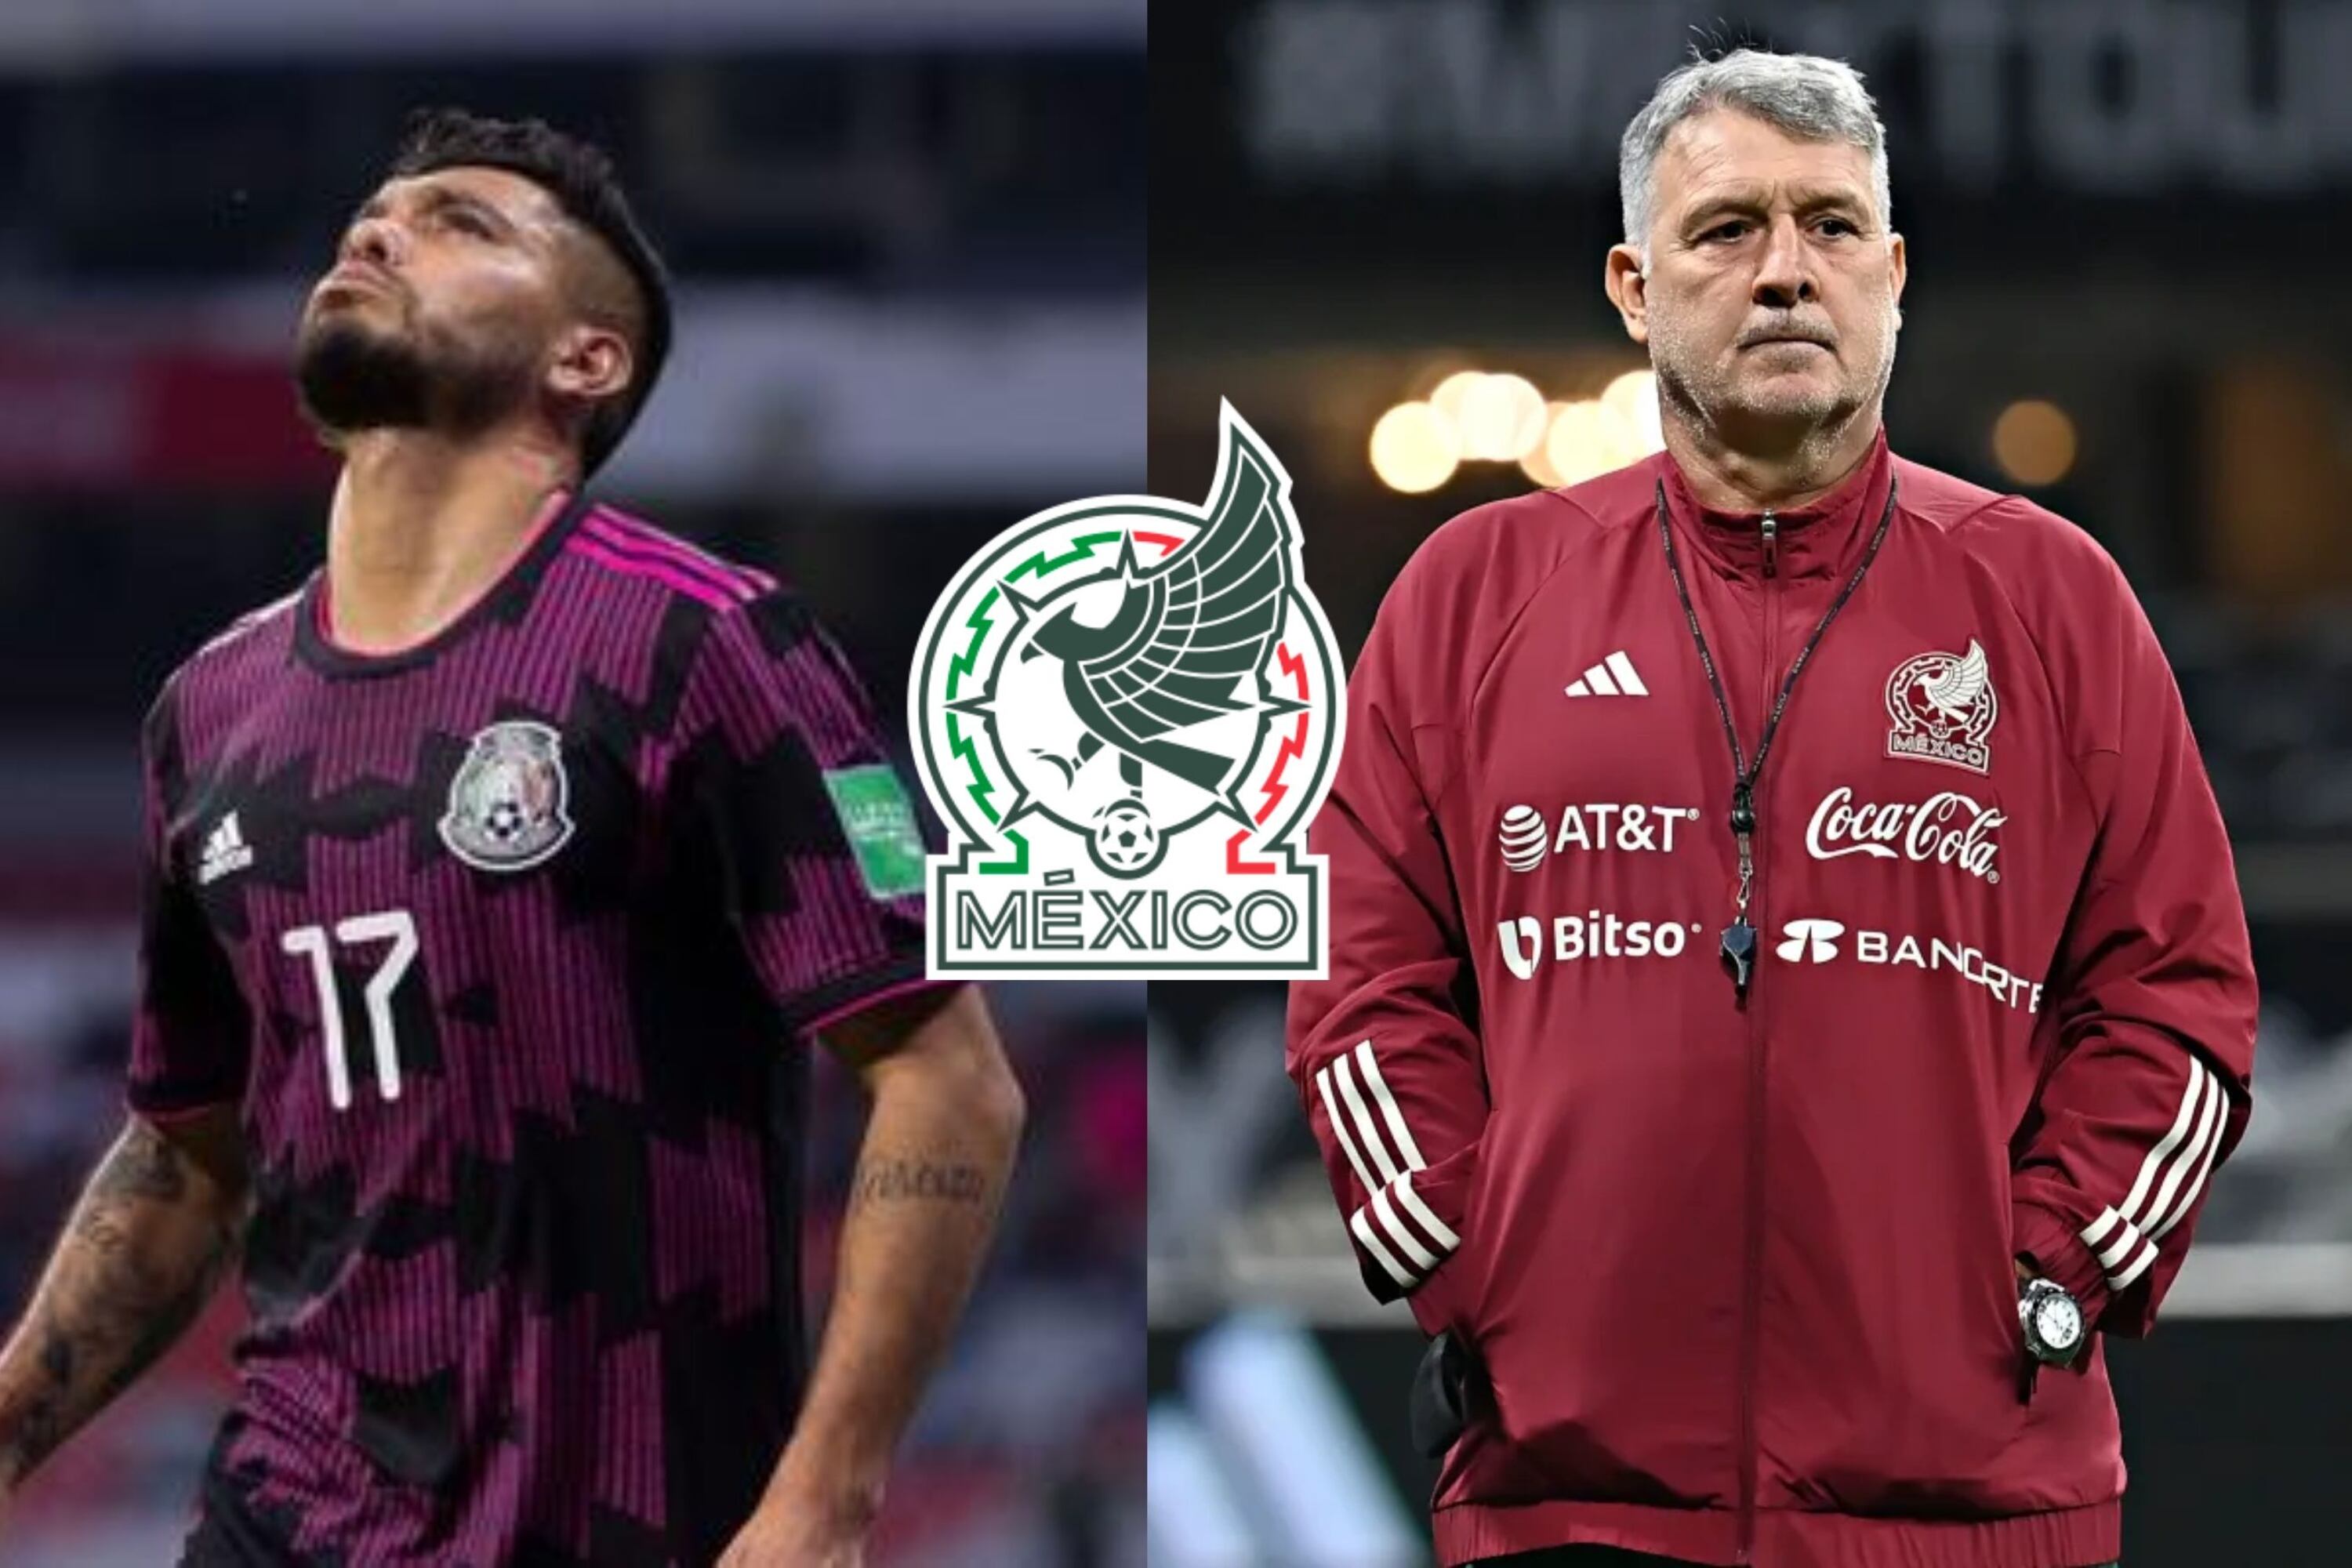 Tecatito's replacement in El Tri will be a surprise, is not Zendejas, not Lainez